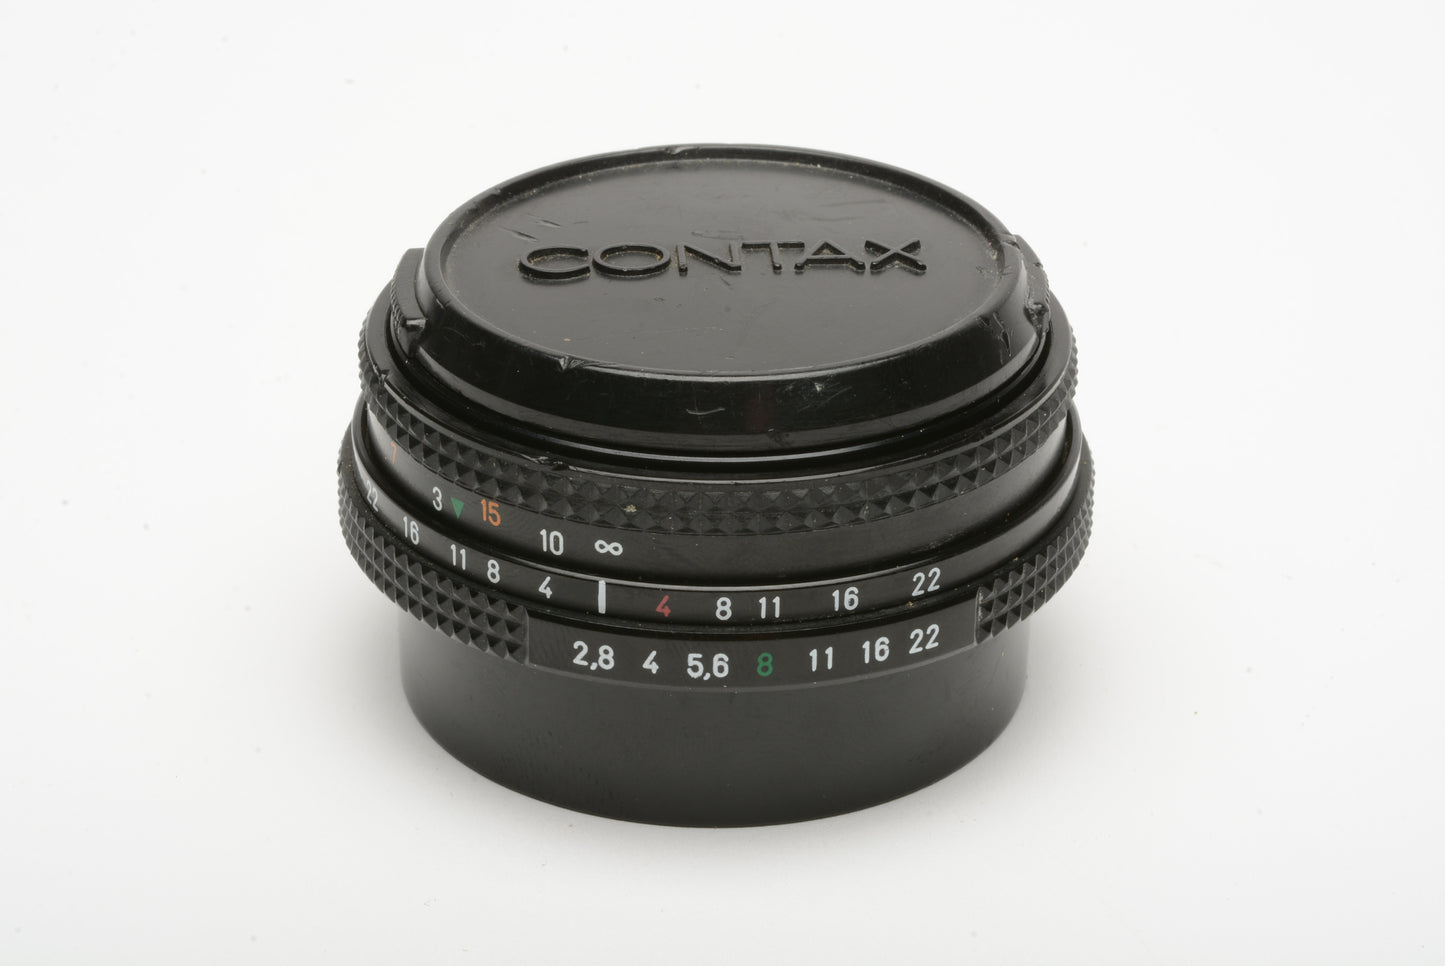 Contax Tessar 45mm F2.8 T* for Contax/Yashica mount, caps